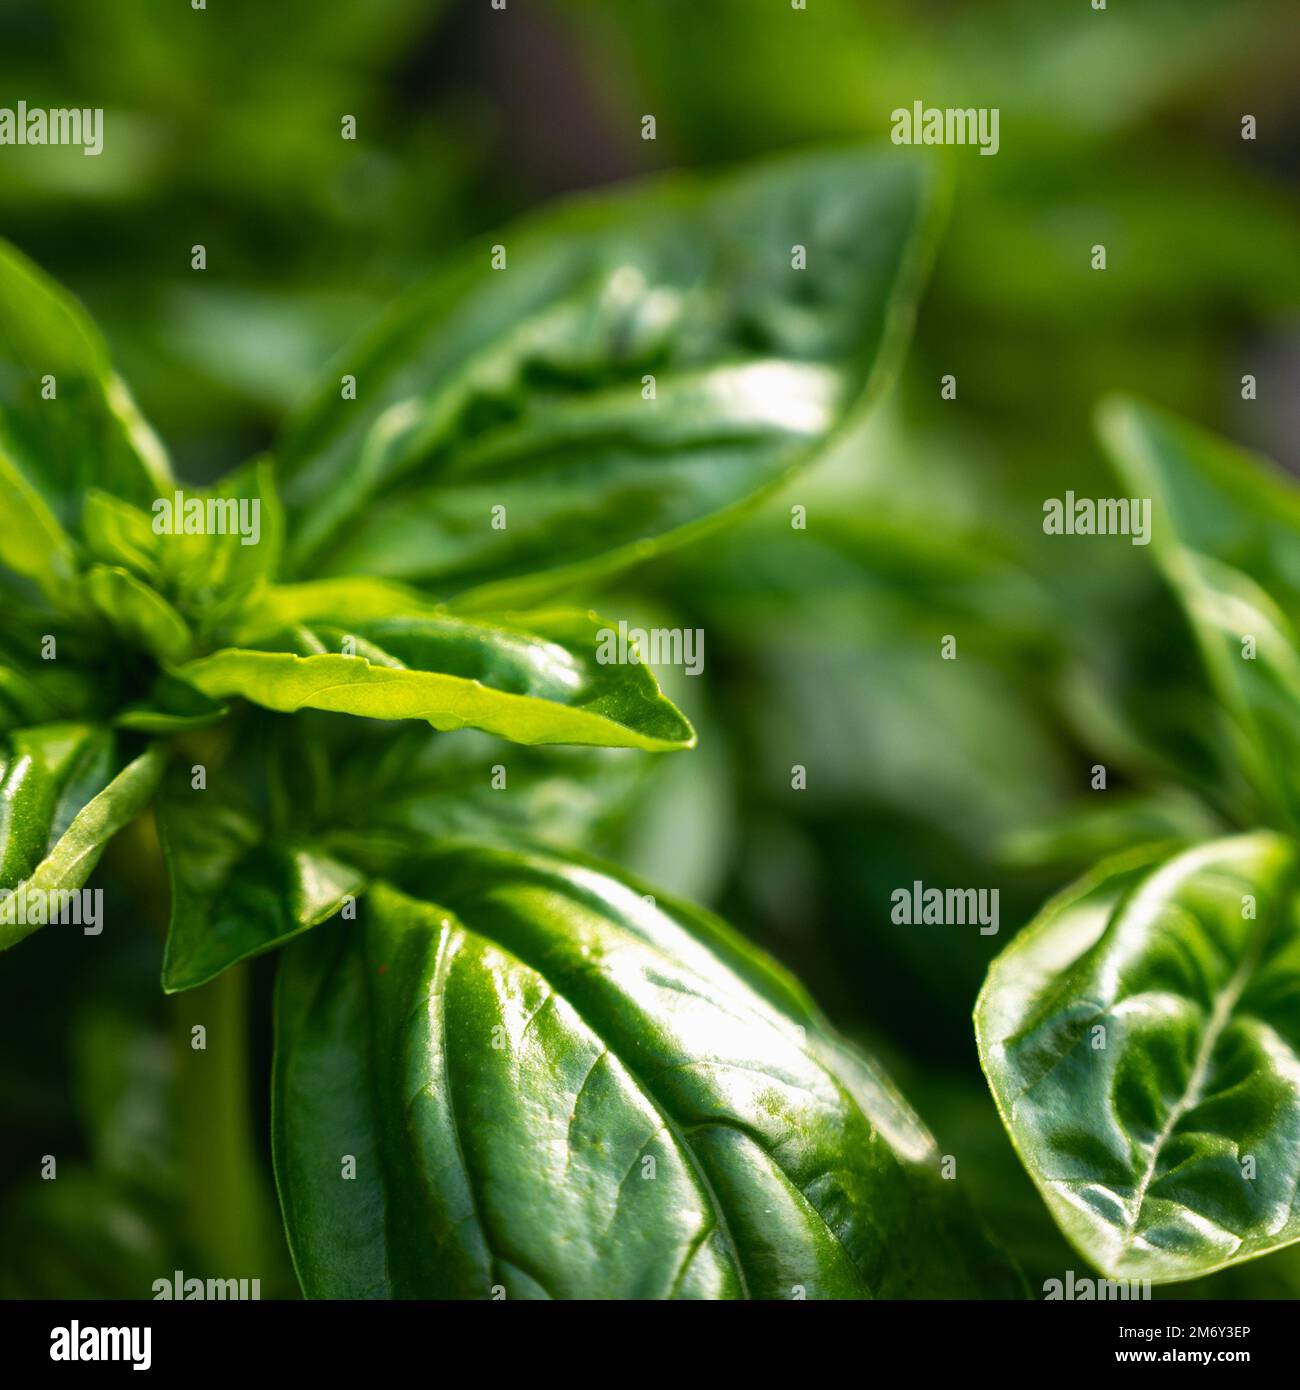 close-up photograph of several basil leaves.Green Basil Fresh Spice Leaves,close-up,isolated.fresh basil leaves Stock Photo